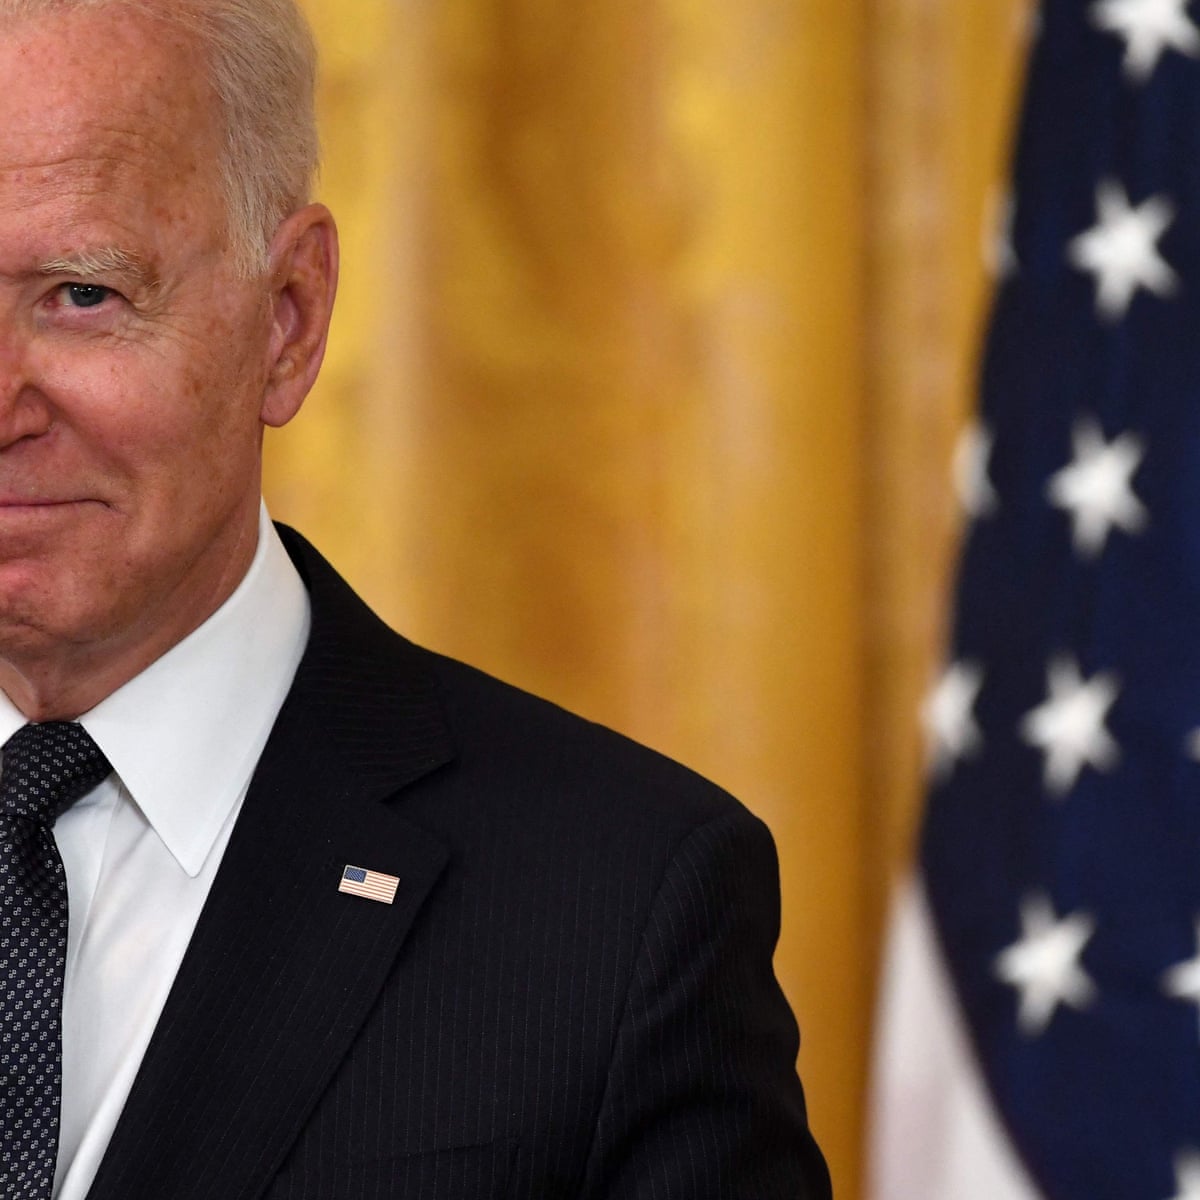 joe biden cold open - Biden|President|Joe|States|Delaware|Obama|Vice|Senate|Campaign|Election|Time|Administration|House|Law|People|Years|Family|Year|Trump|School|University|Senator|Office|Party|Country|Committee|Act|War|Days|Climate|Hunter|Health|America|State|Day|Democrats|Americans|Documents|Care|Plan|United States|Vice President|White House|Joe Biden|Biden Administration|Democratic Party|Law School|Presidential Election|President Joe Biden|Executive Orders|Foreign Relations Committee|Presidential Campaign|Second Term|47Th Vice President|Syracuse University|Climate Change|Hillary Clinton|Last Year|Barack Obama|Joseph Robinette Biden|U.S. Senator|Health Care|U.S. Senate|Donald Trump|President Trump|President Biden|Federal Register|Judiciary Committee|Presidential Nomination|Presidential Medal